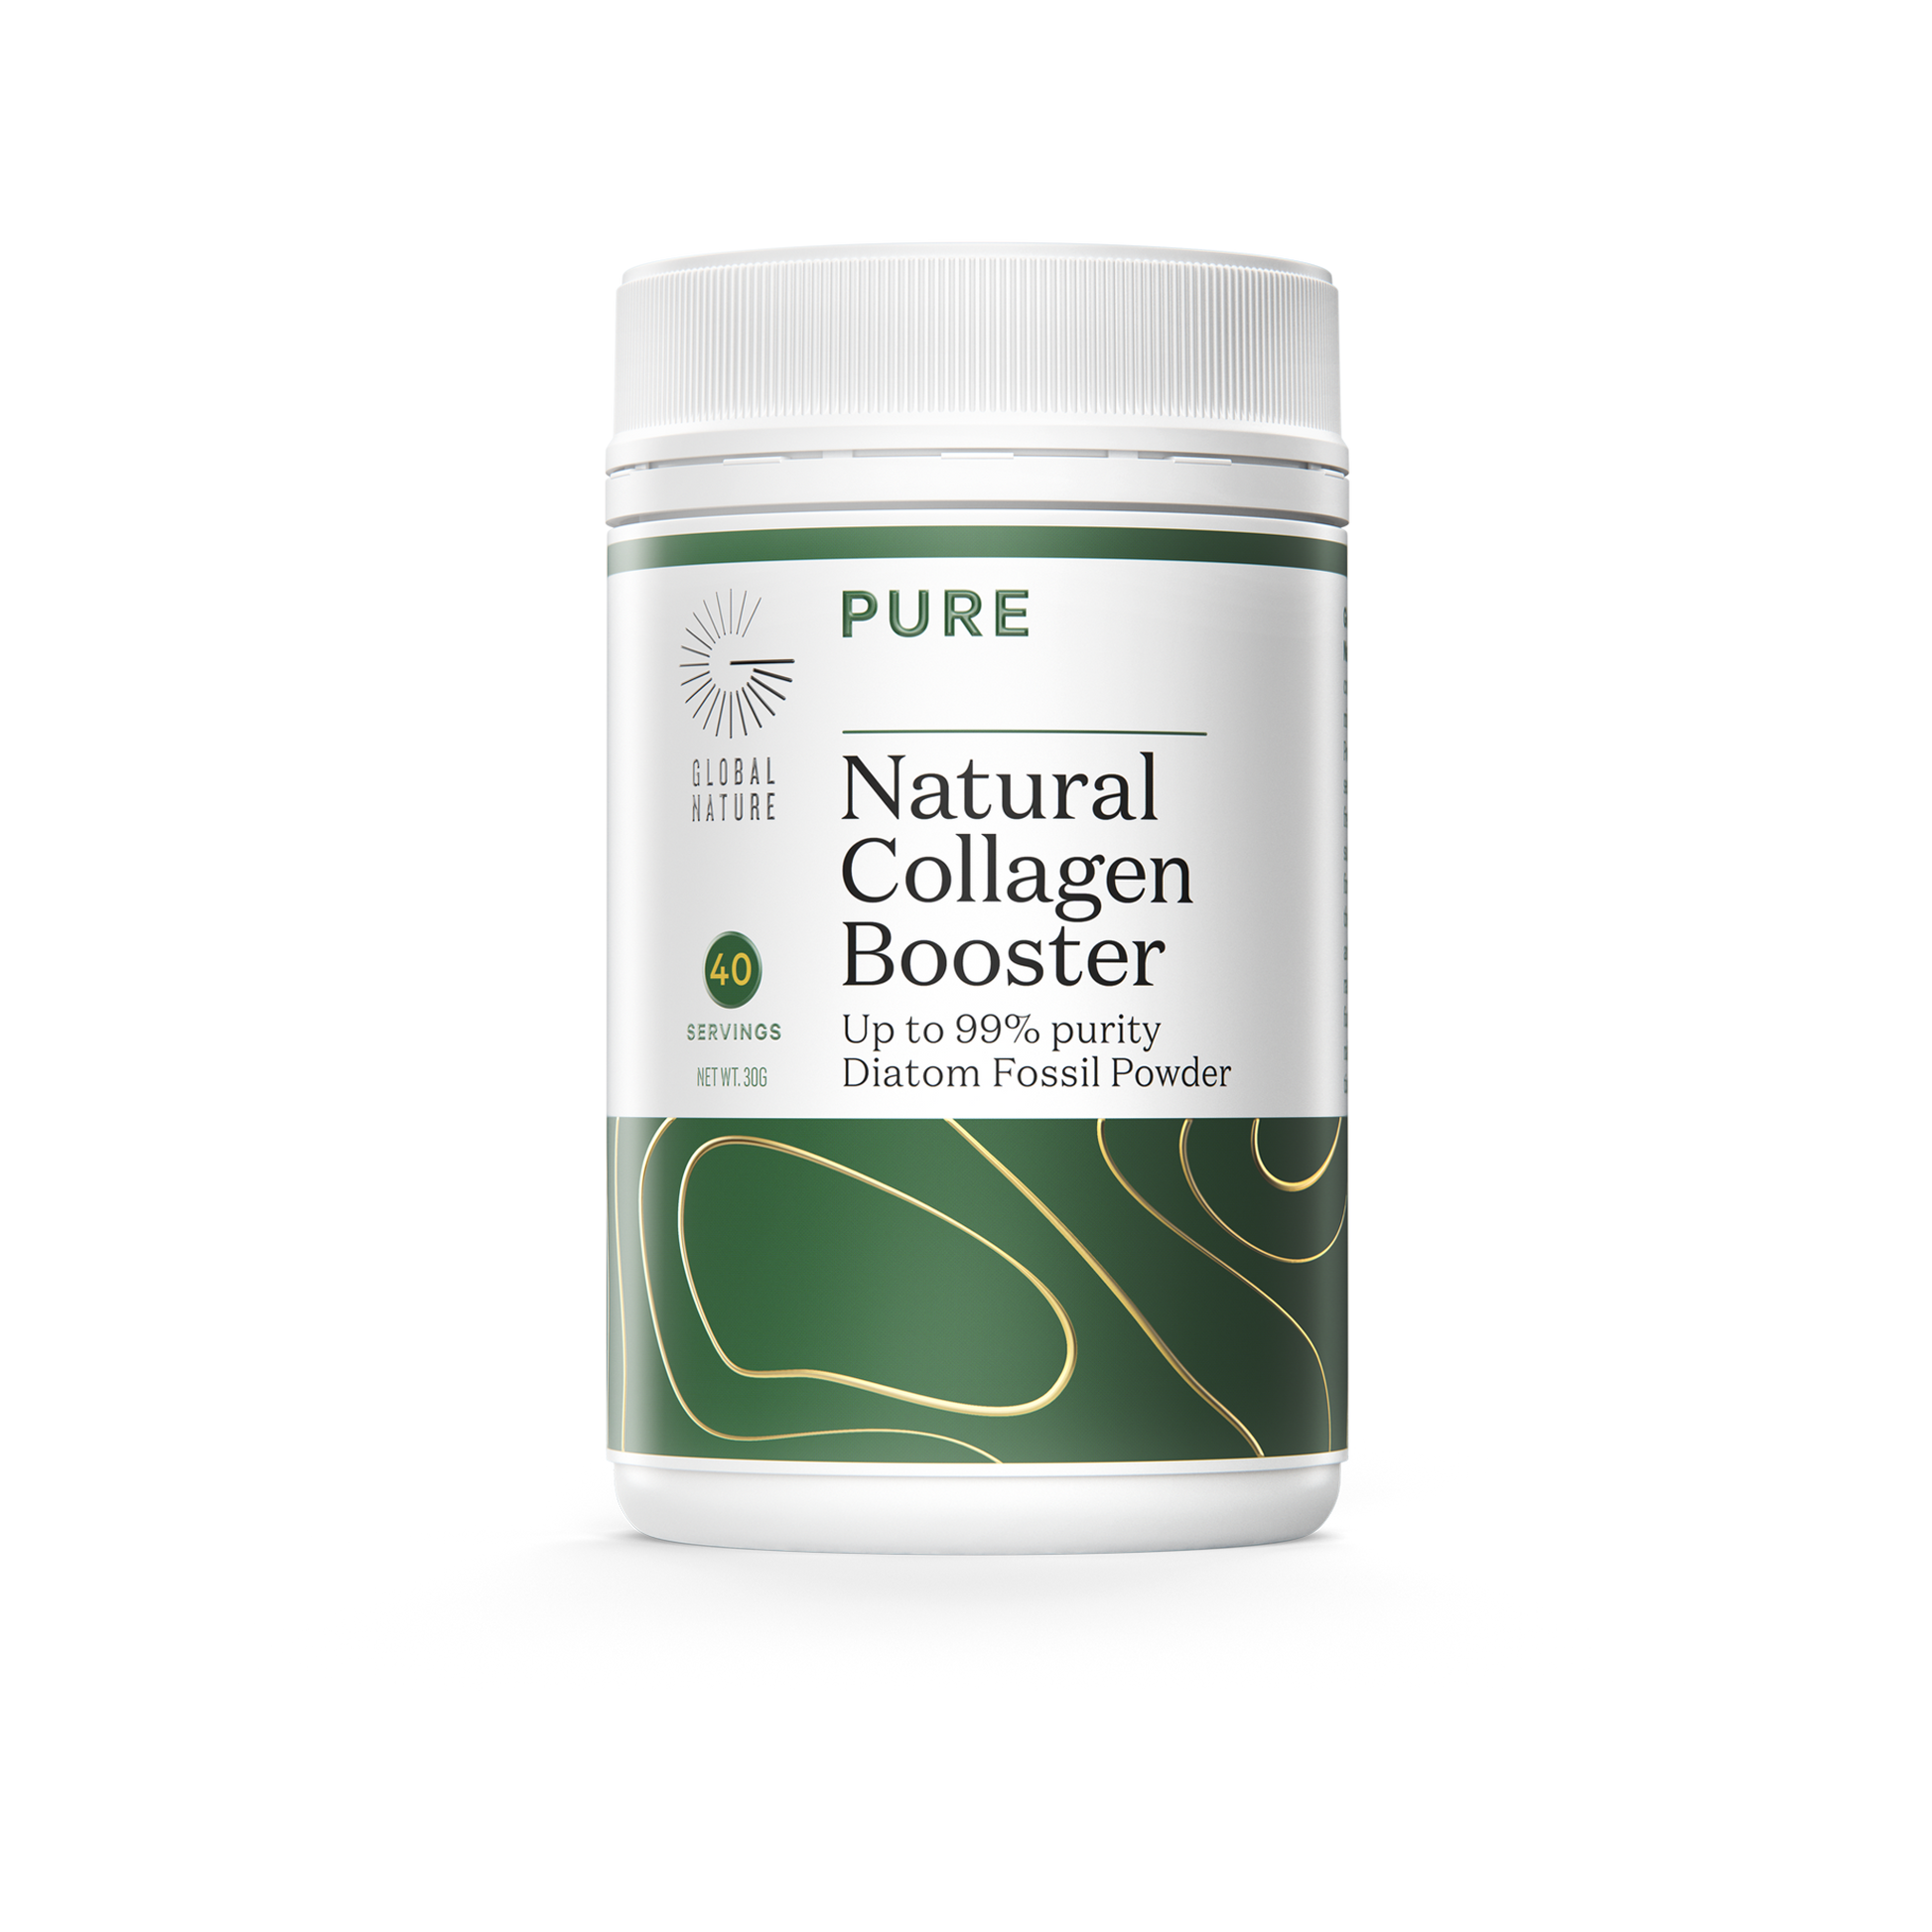 A bottle of PURE Natural Collagen Booster